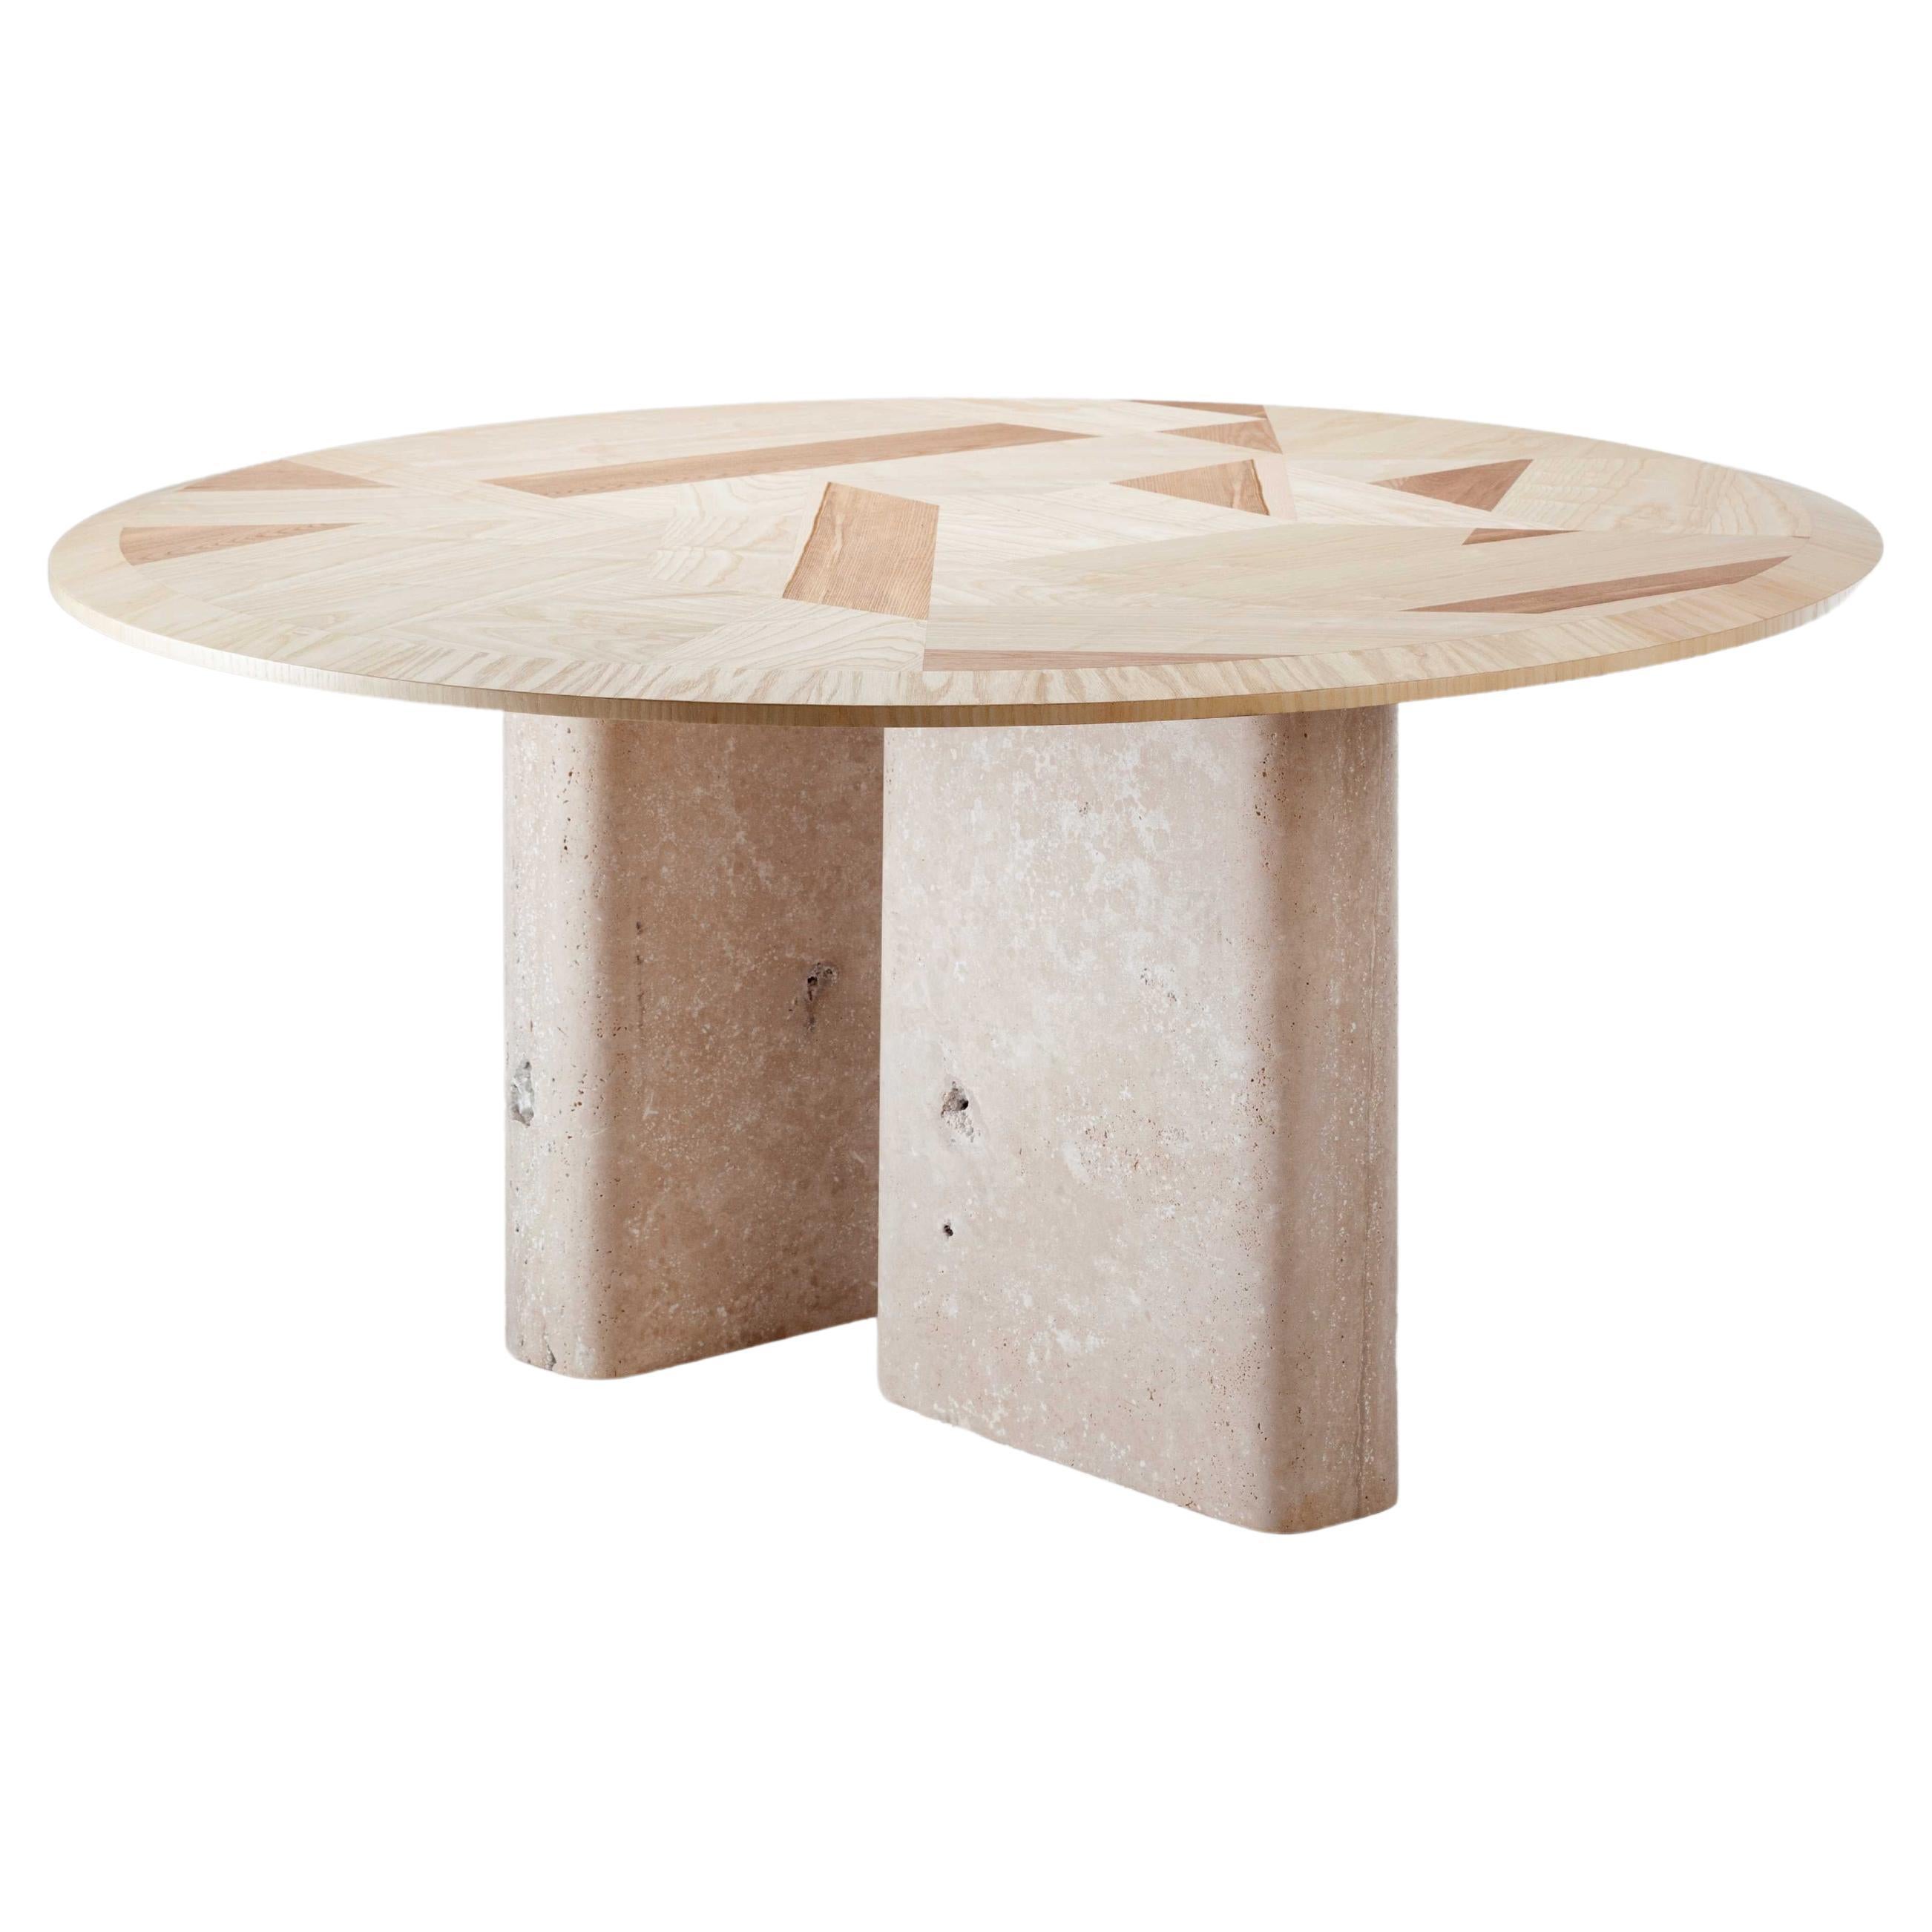 DOOQ Organic Modern Natural Olive Ash and Travertine Dining Table L'anamour, 120 For Sale